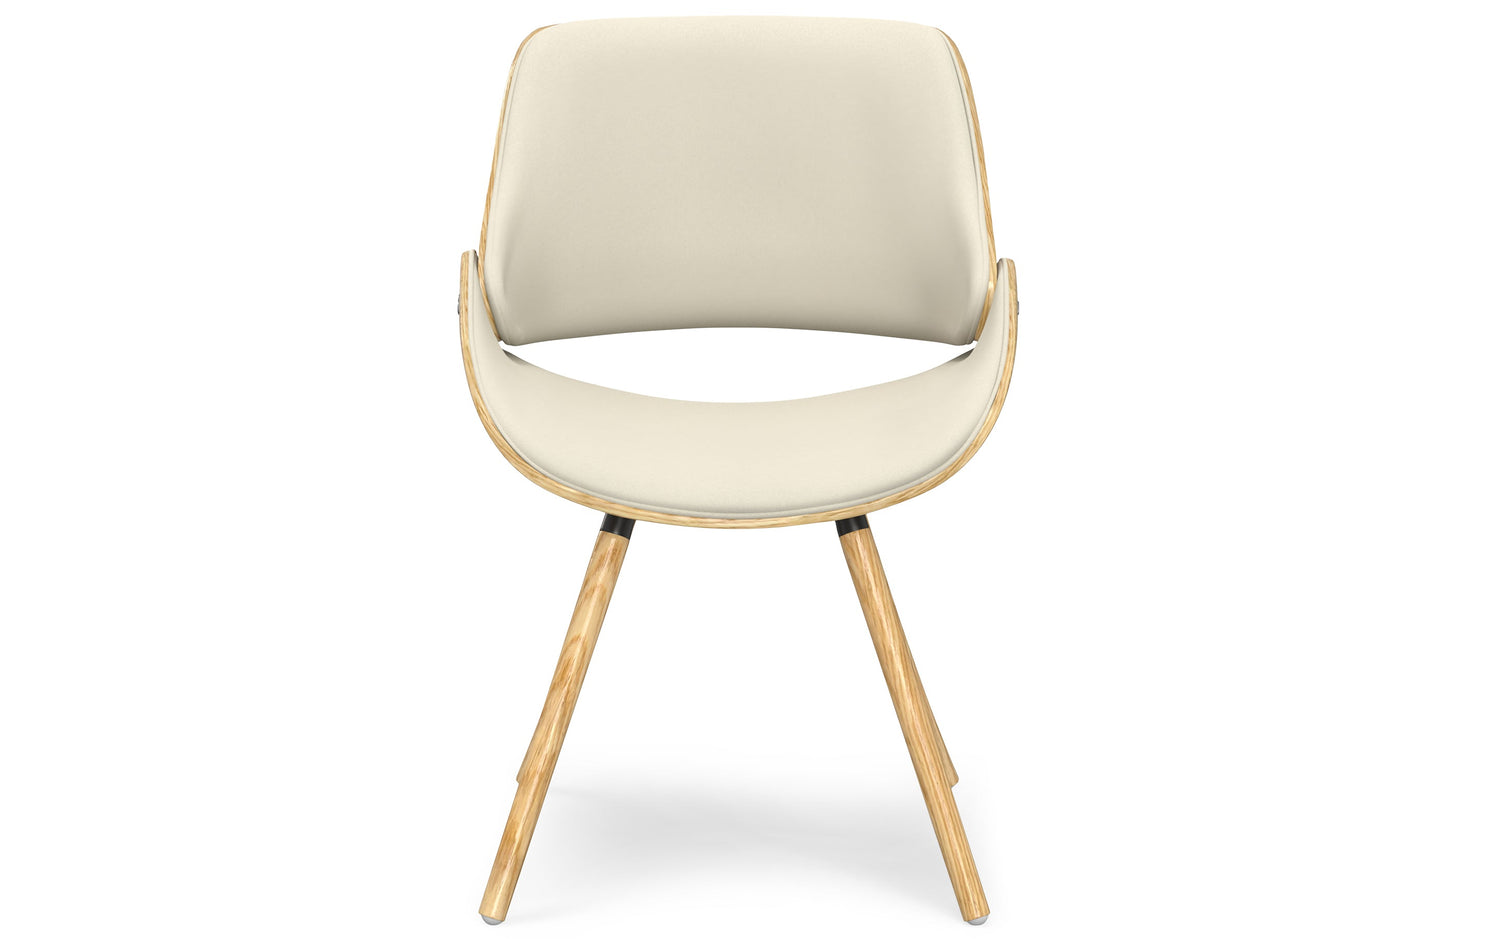 Natural Light Wood Linen Style Fabric | Malden Bentwood Dining Chair with Wood Back